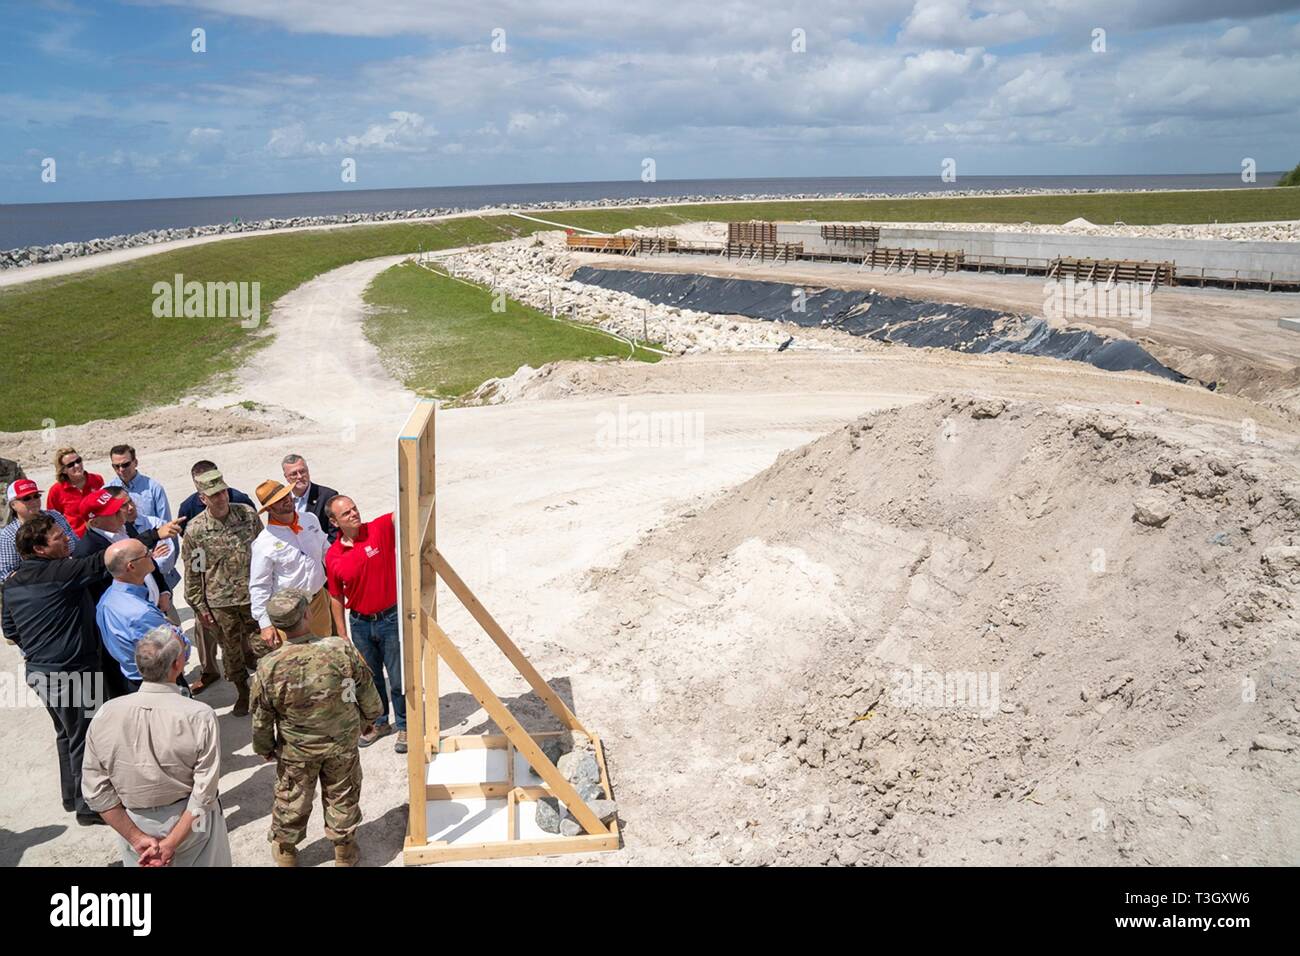 U.S President Donald Trump listens to a presentation on the Herbert Hoover Dike during a visit to Lake Okeechobee with Florida Gov. Ron DeSantis, Sen. Marco Rubio, and Sen. Rick Scott March 29, 2019 in Canal Point, Florida. The Herbert Hoover Dike is a 143-mile earthen dam that surrounds Lake Okeechobee and currently under a massive renovation and repair project. Stock Photo